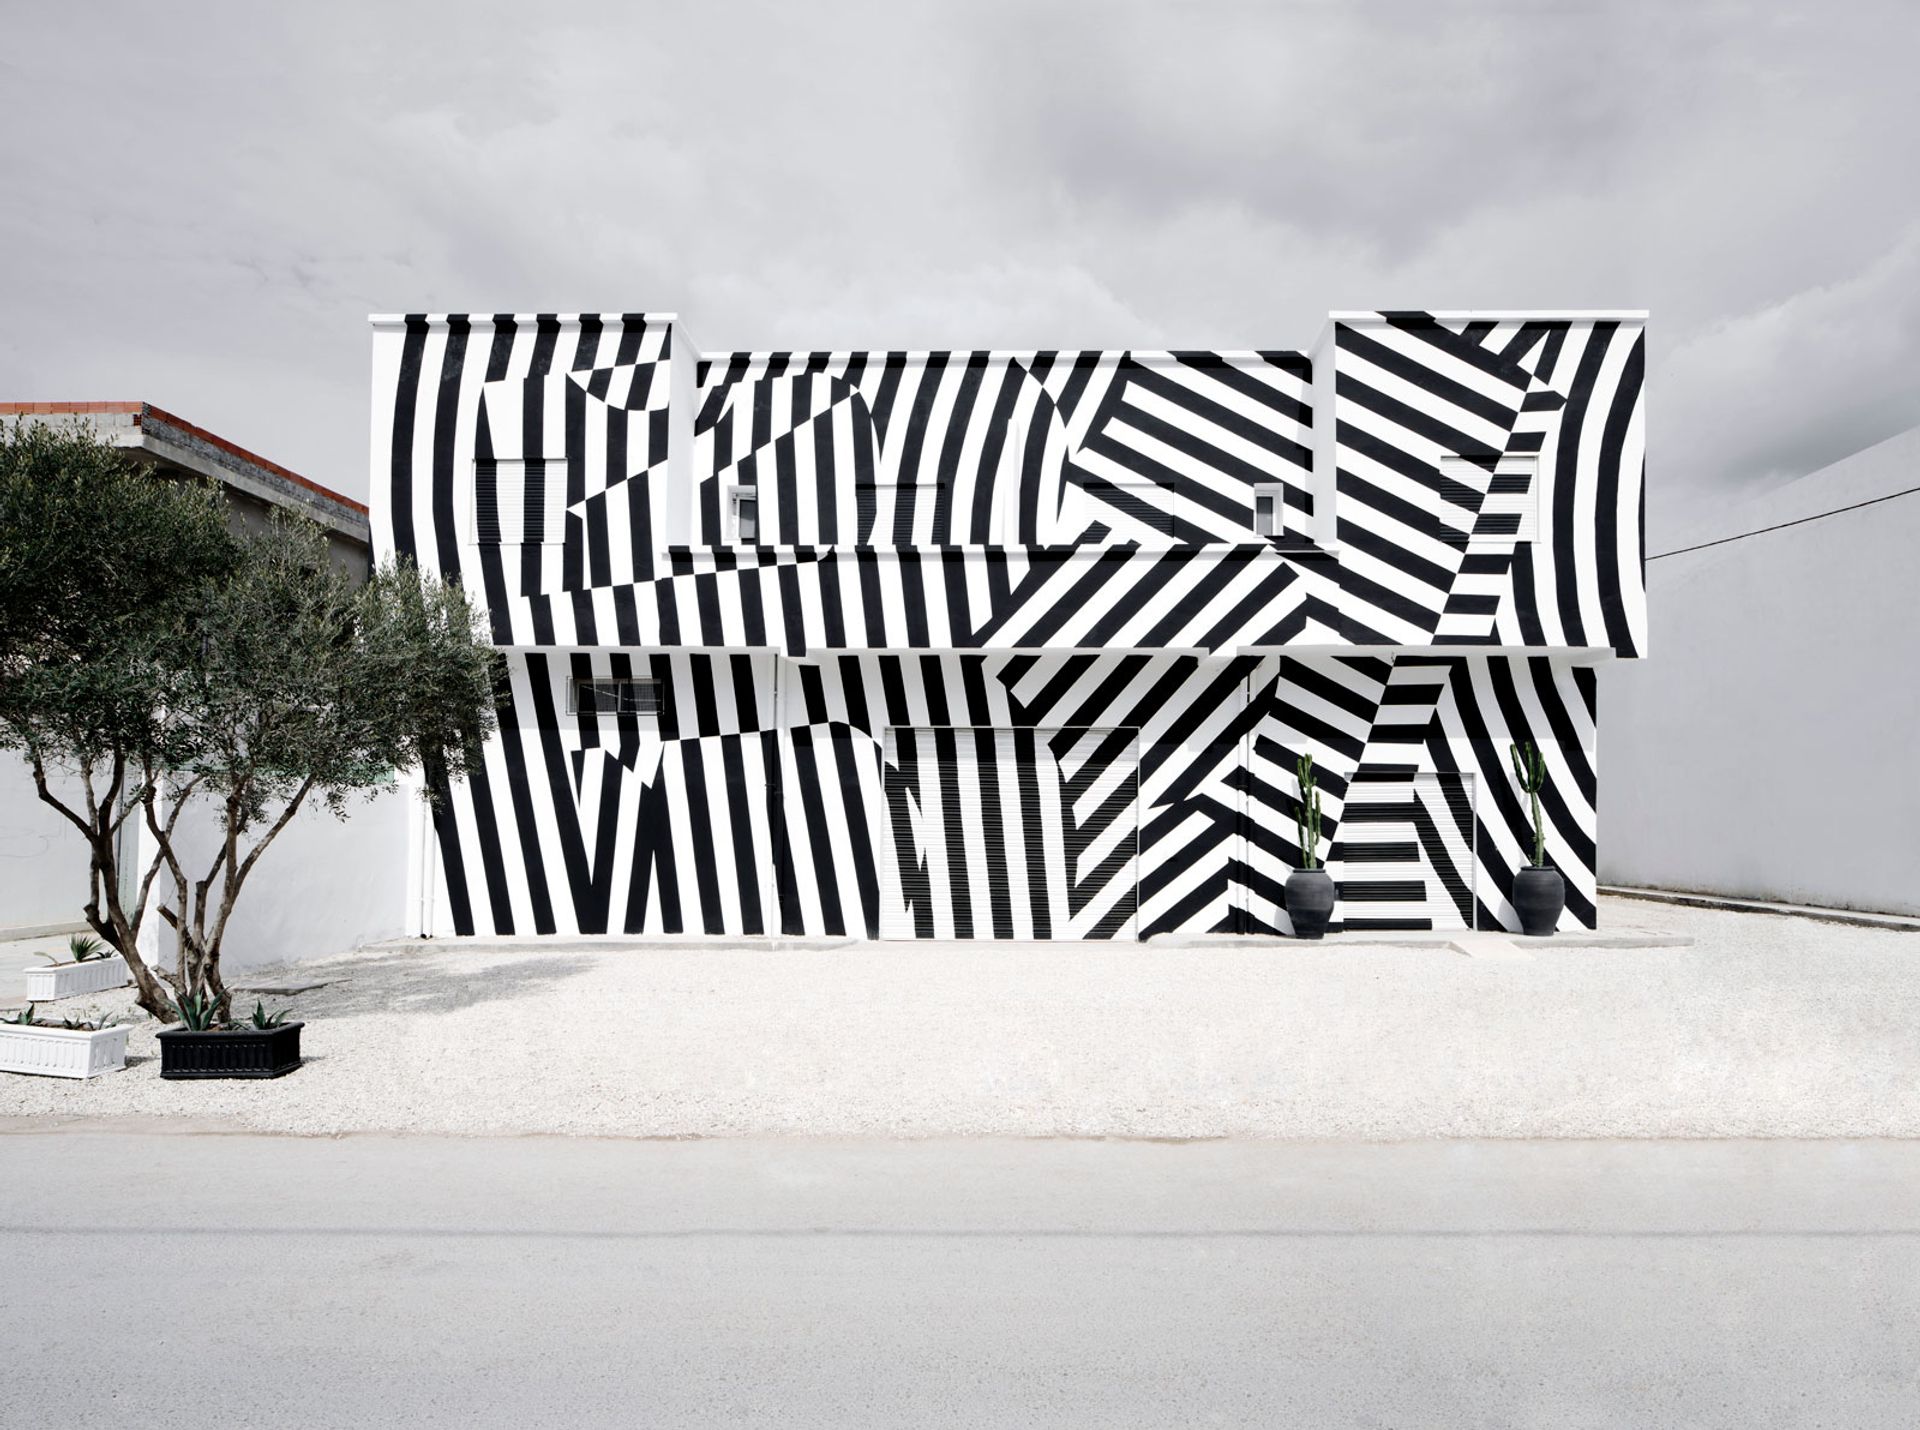 B7L9’s black-and-white striped exterior was painted with the help of local residents Photo: © yoann cimier